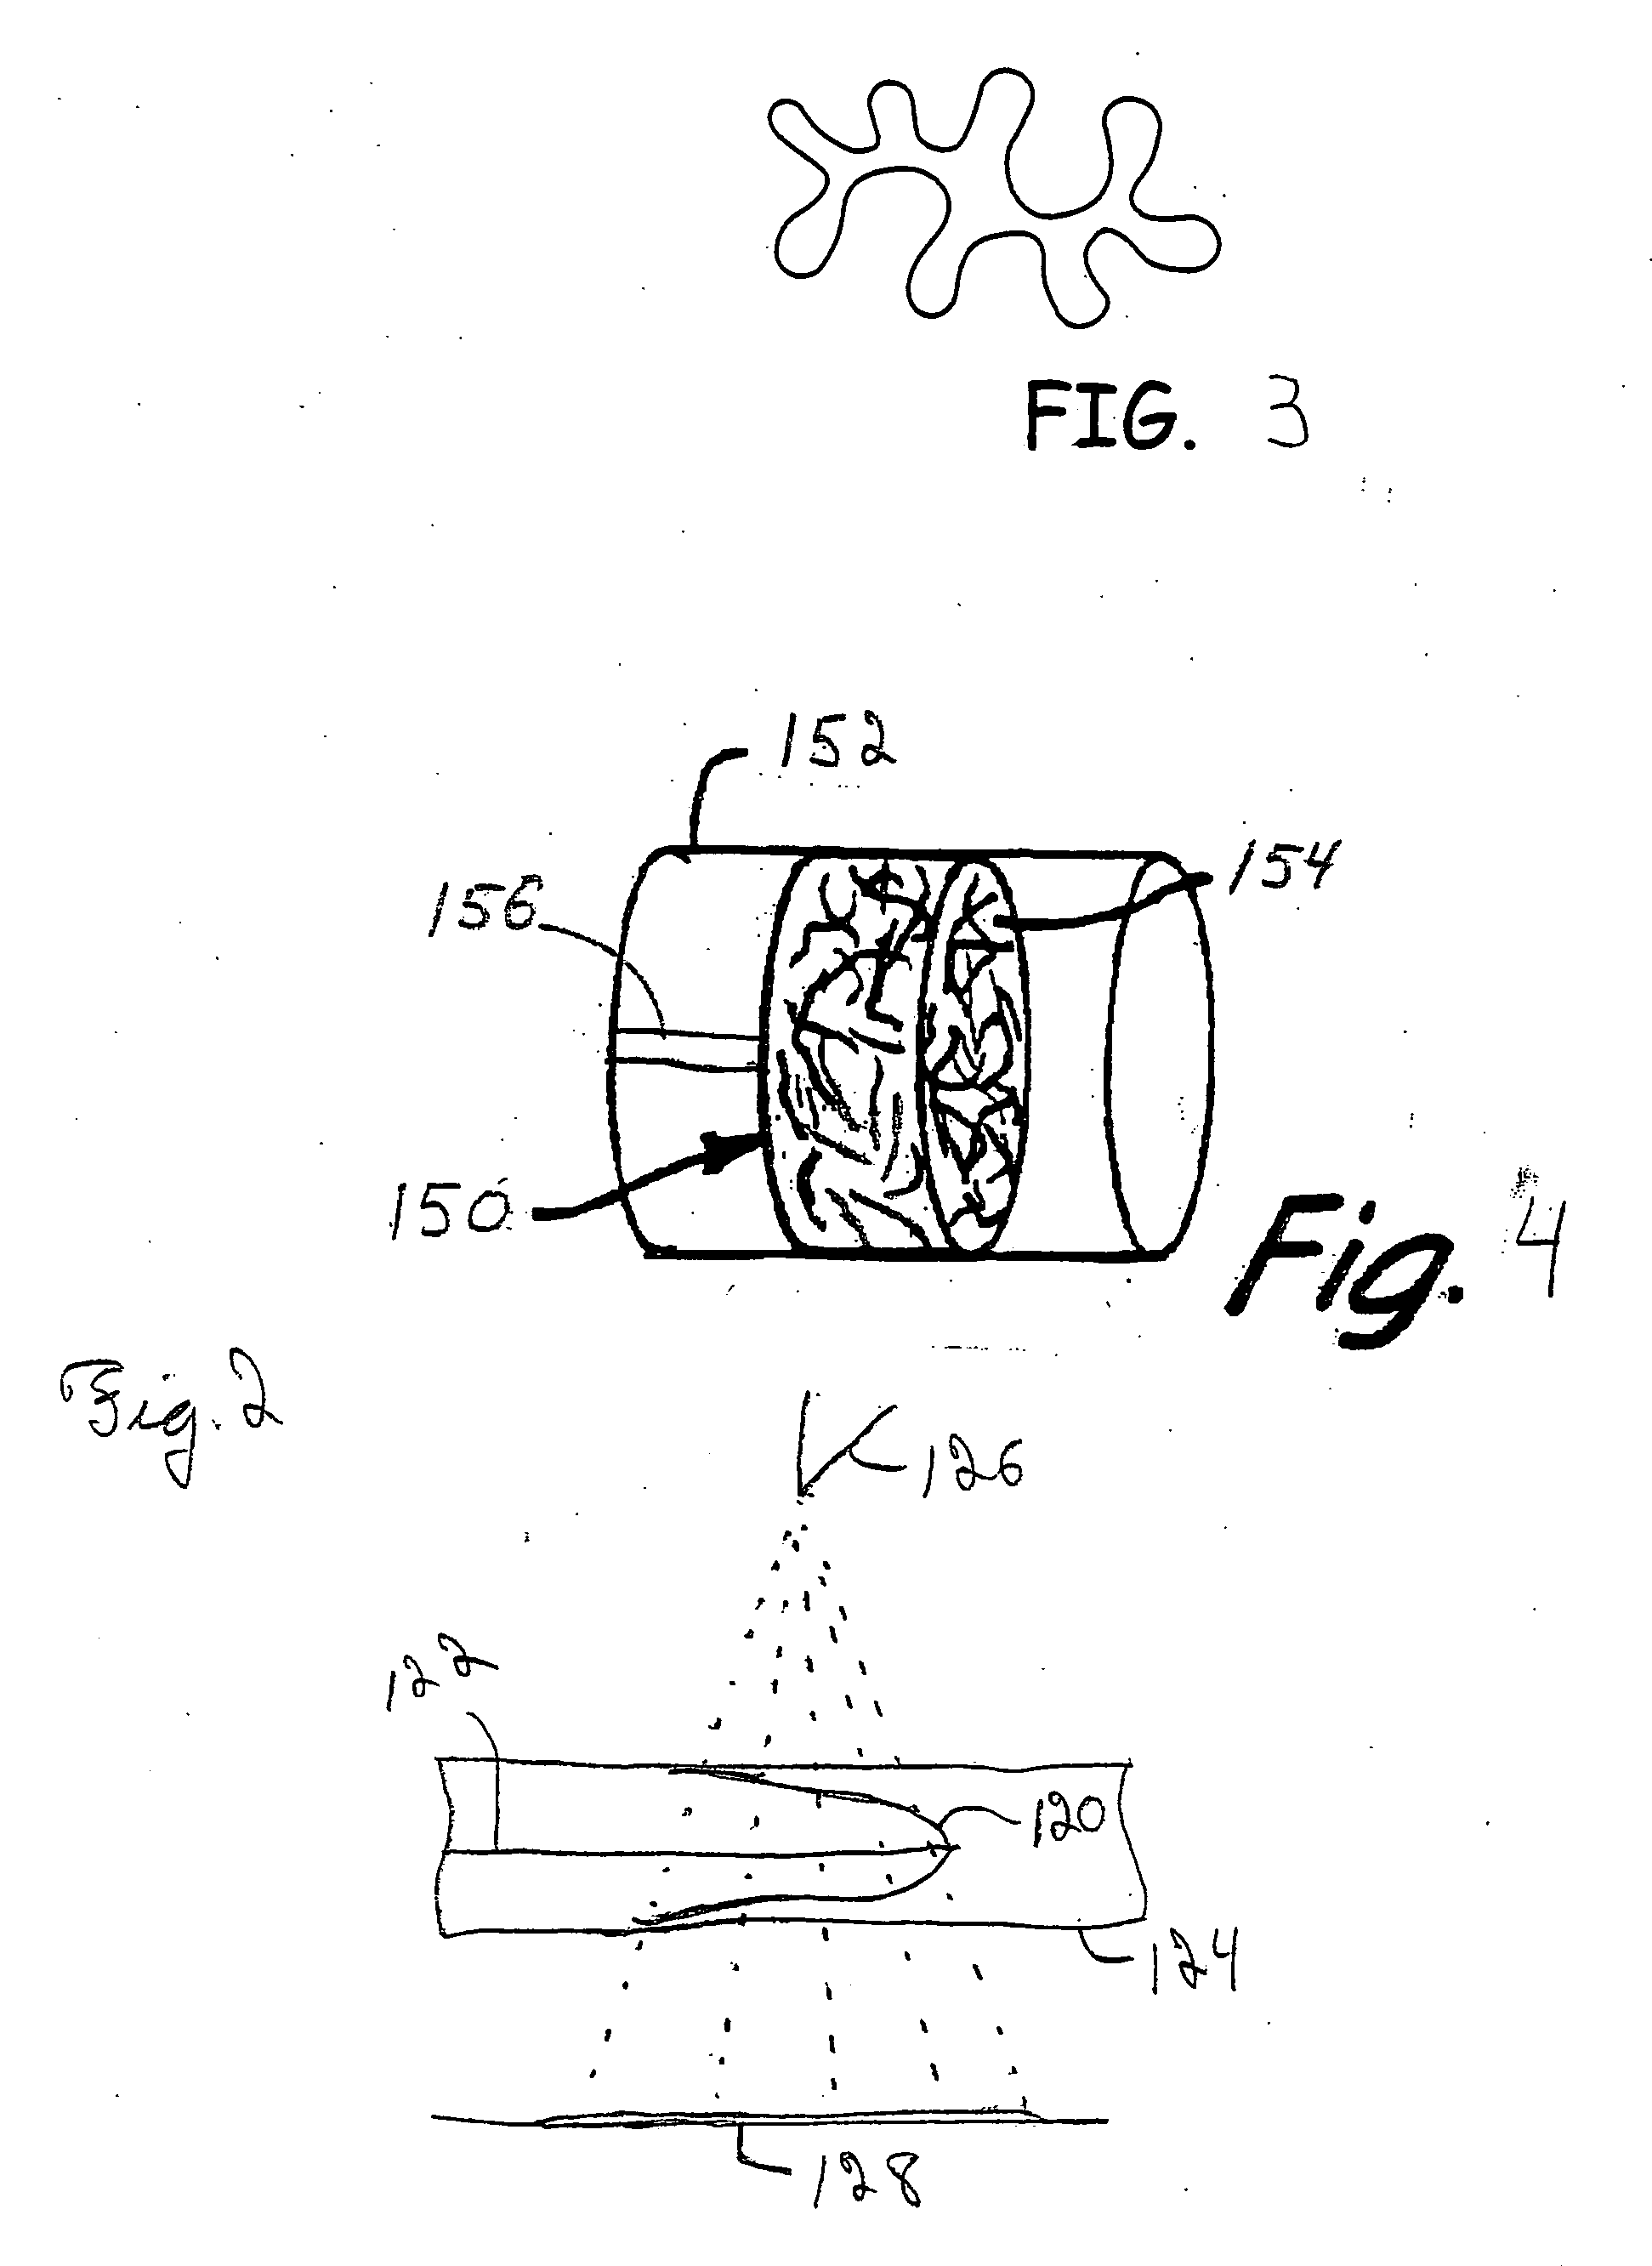 Radiopaque fibers and filtration matrices